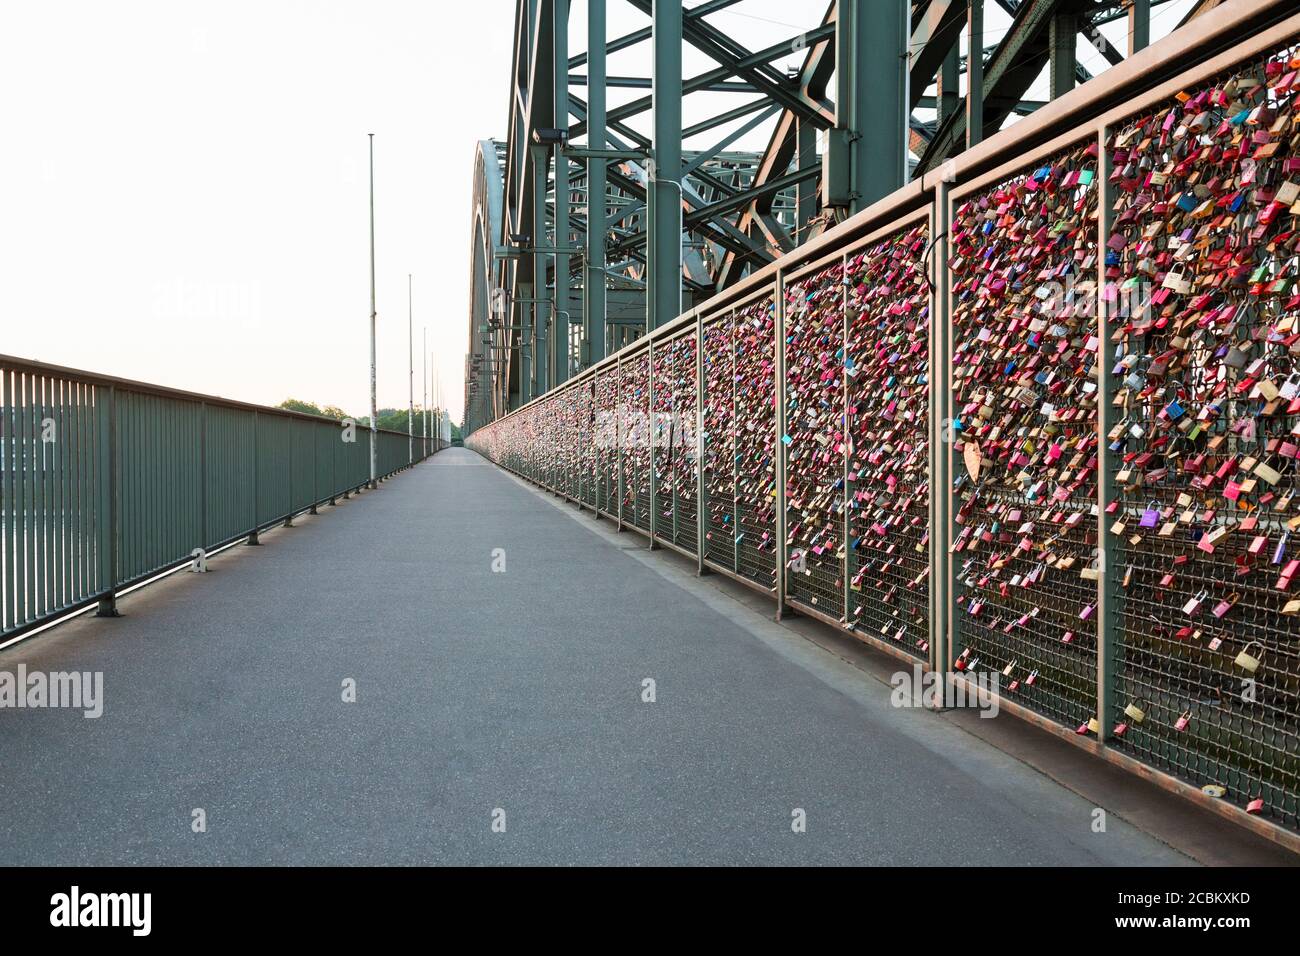 Abundant display of love locks attached to Hohenzollern Bridge fence, Cologne, Germany Stock Photo